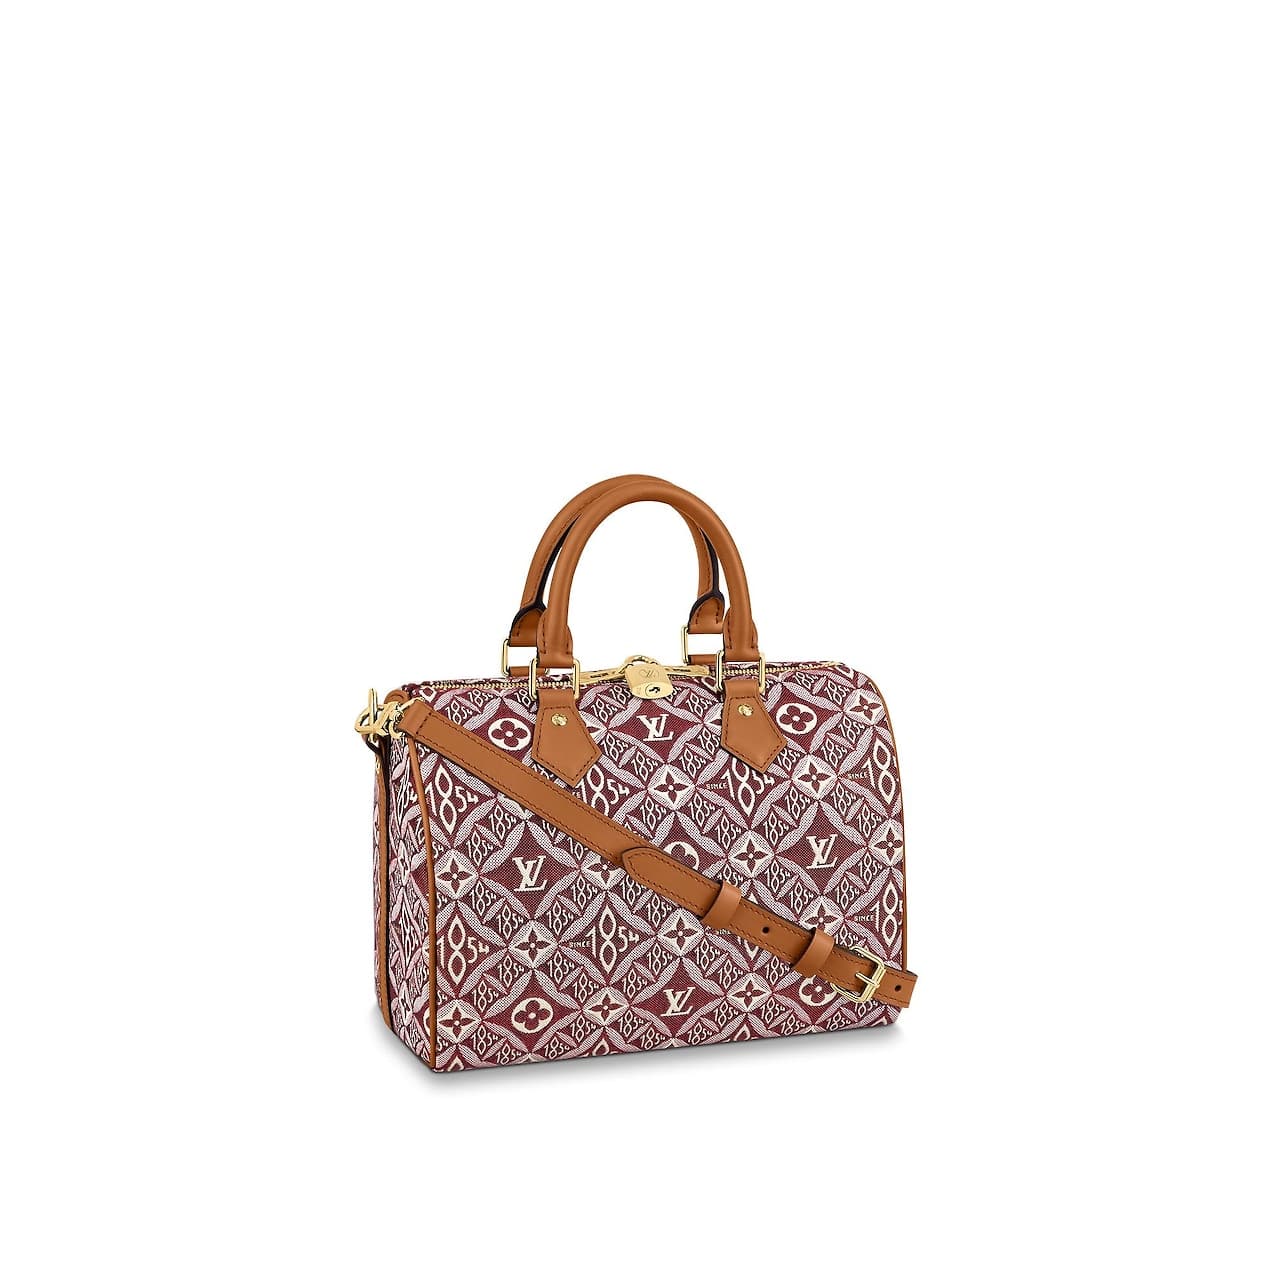 Louis Vuitton Fall Winter Bag Collection Featuring Since 1854 Textile Spotted Fashion